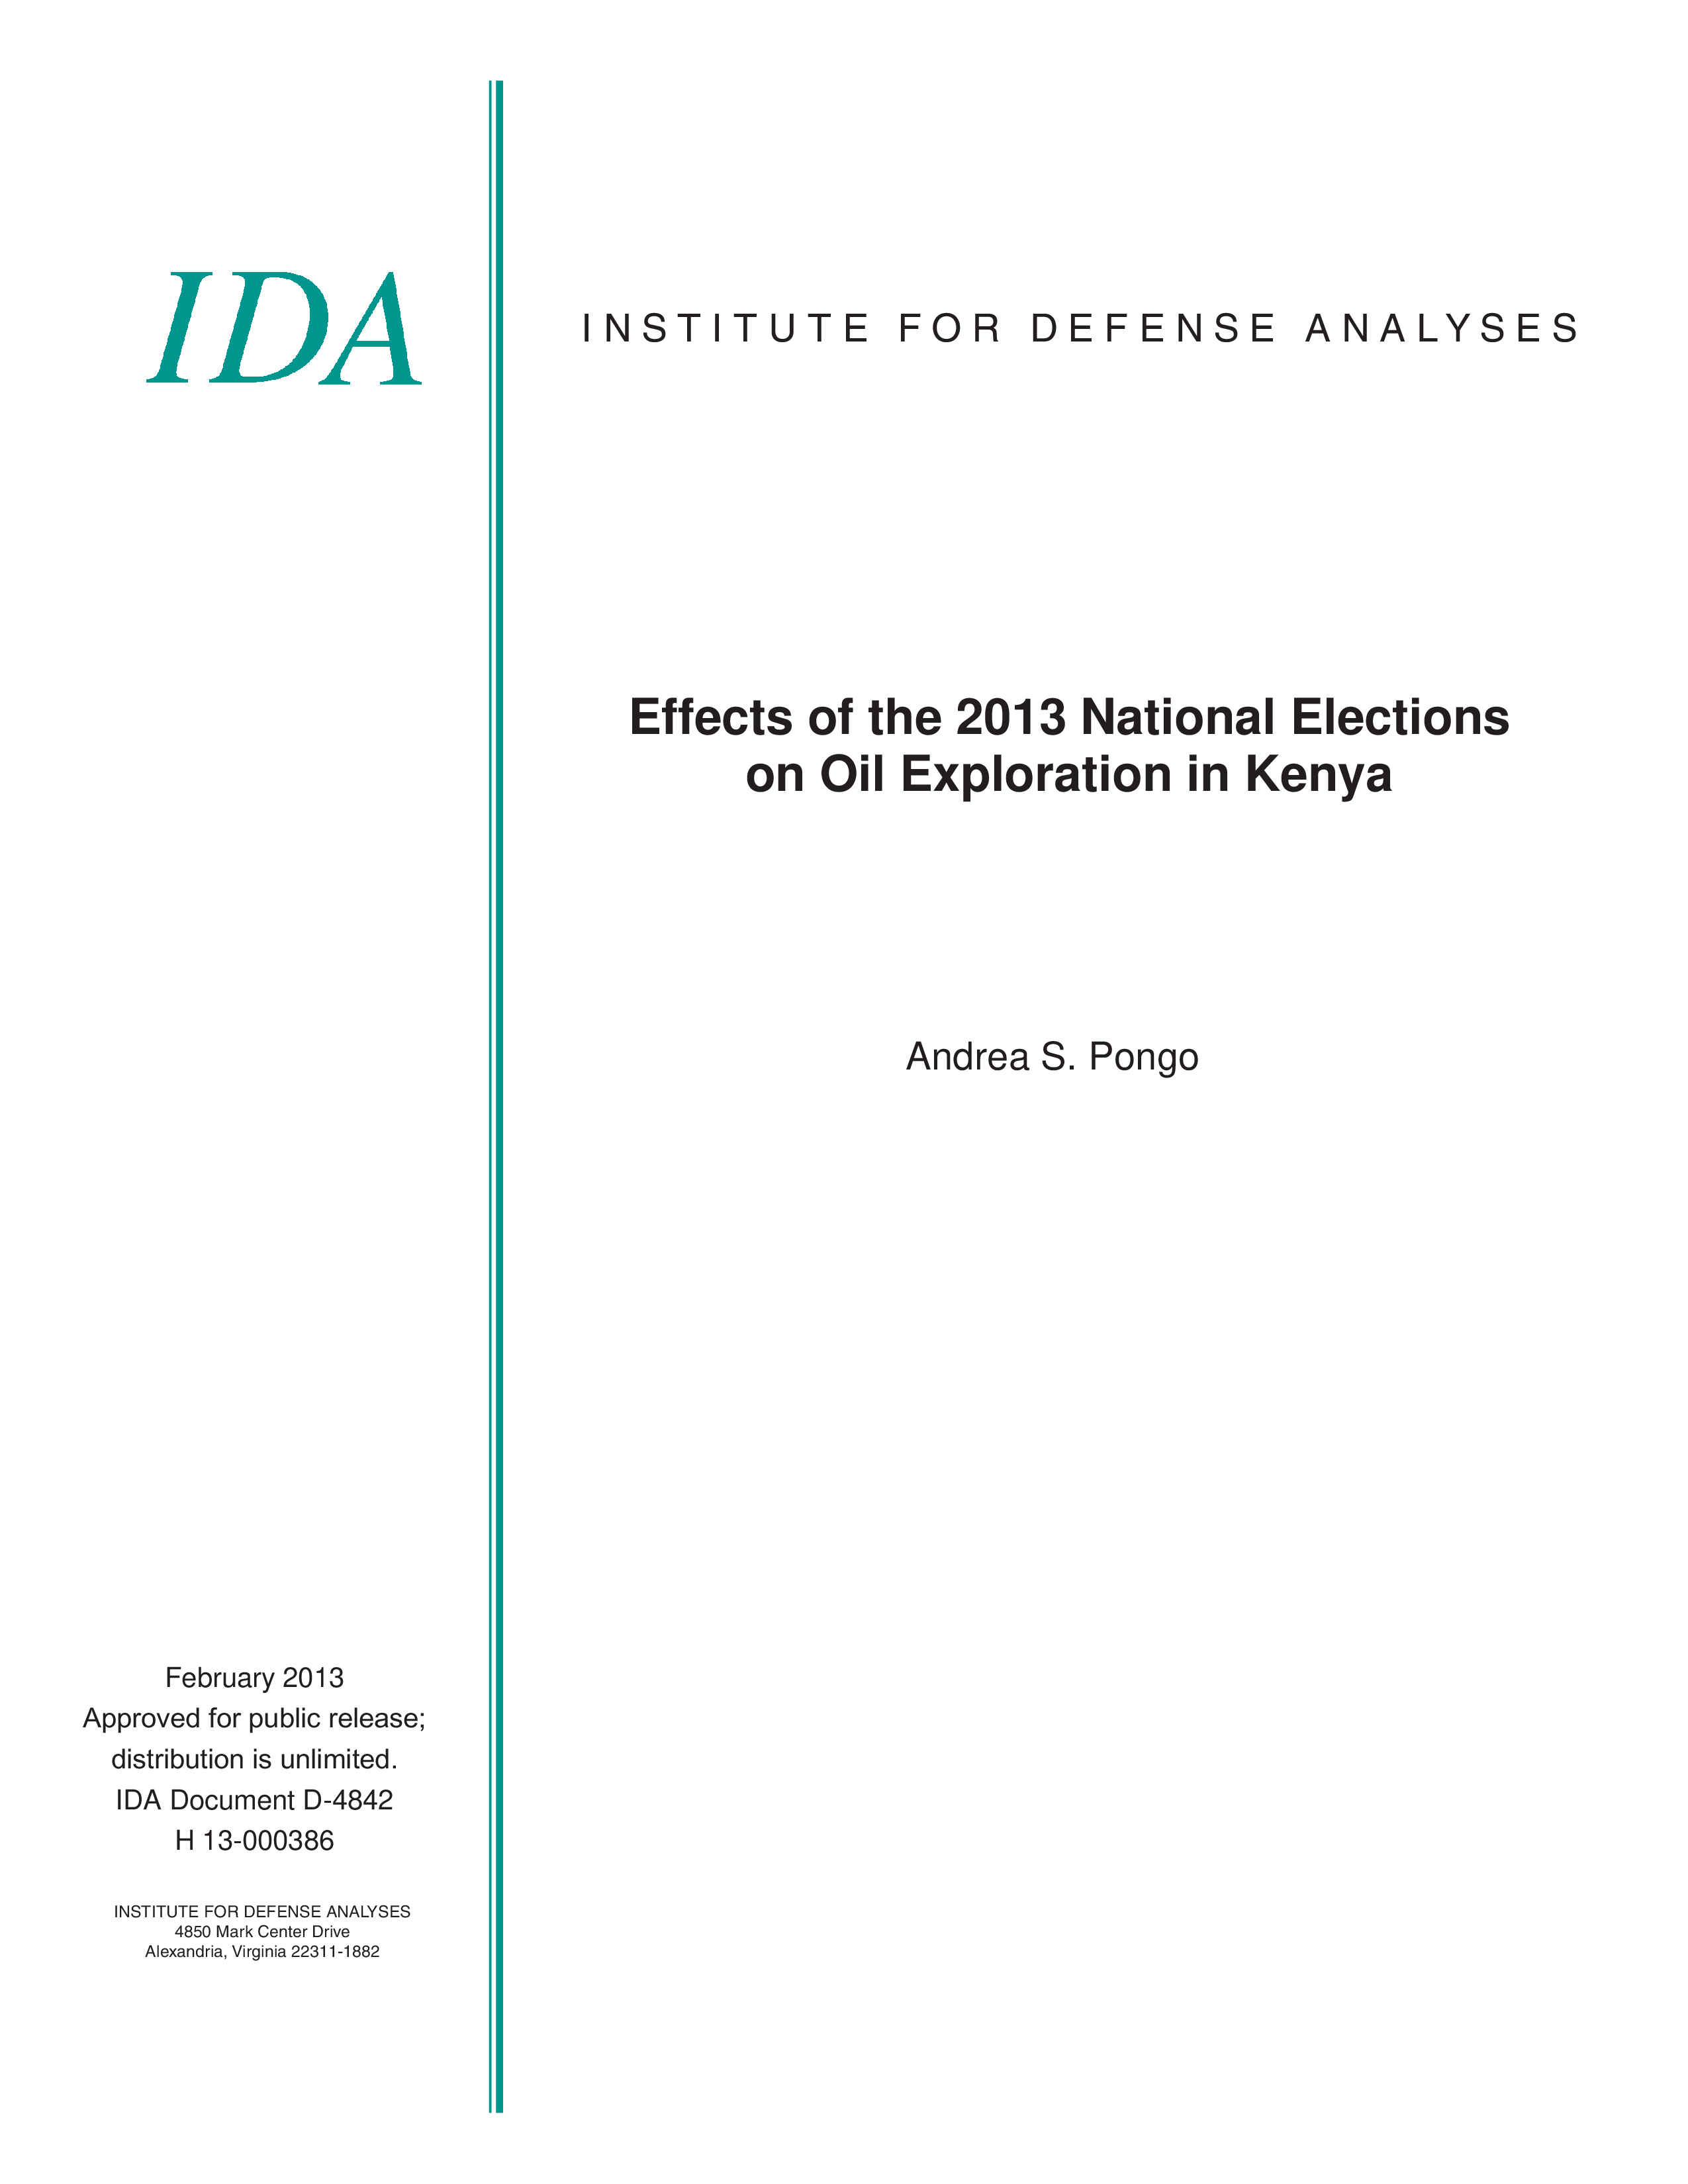 Effects of the 2013 National Elections  on Oil Exploration in Kenya